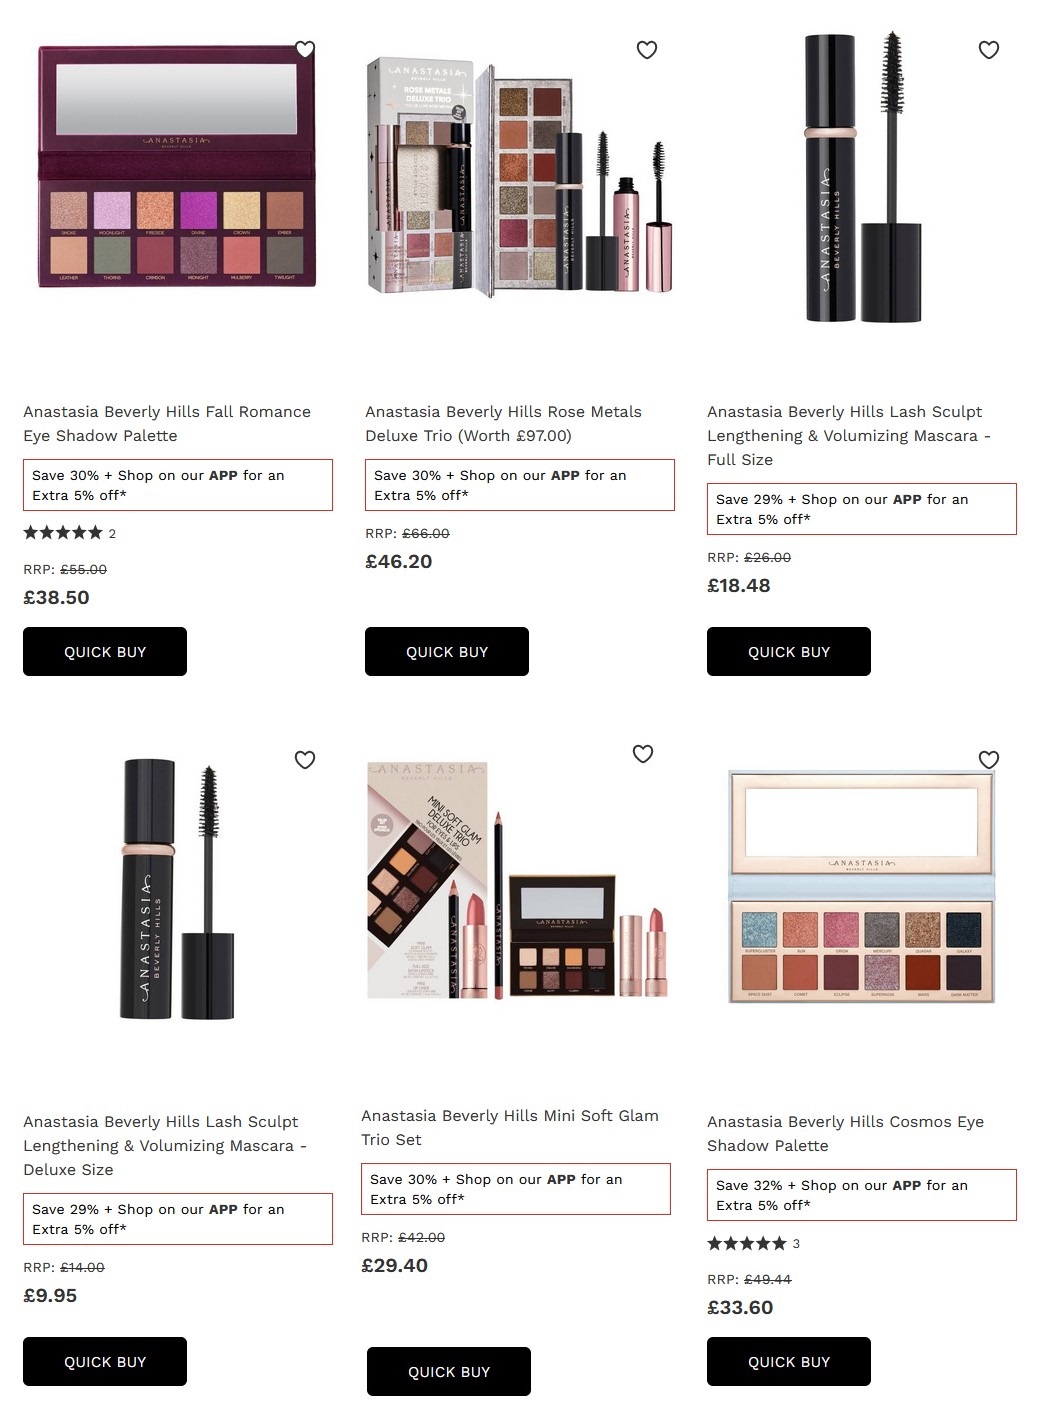 Up to 30% off selected Shop All Anastasia Beverly Hills Makeup